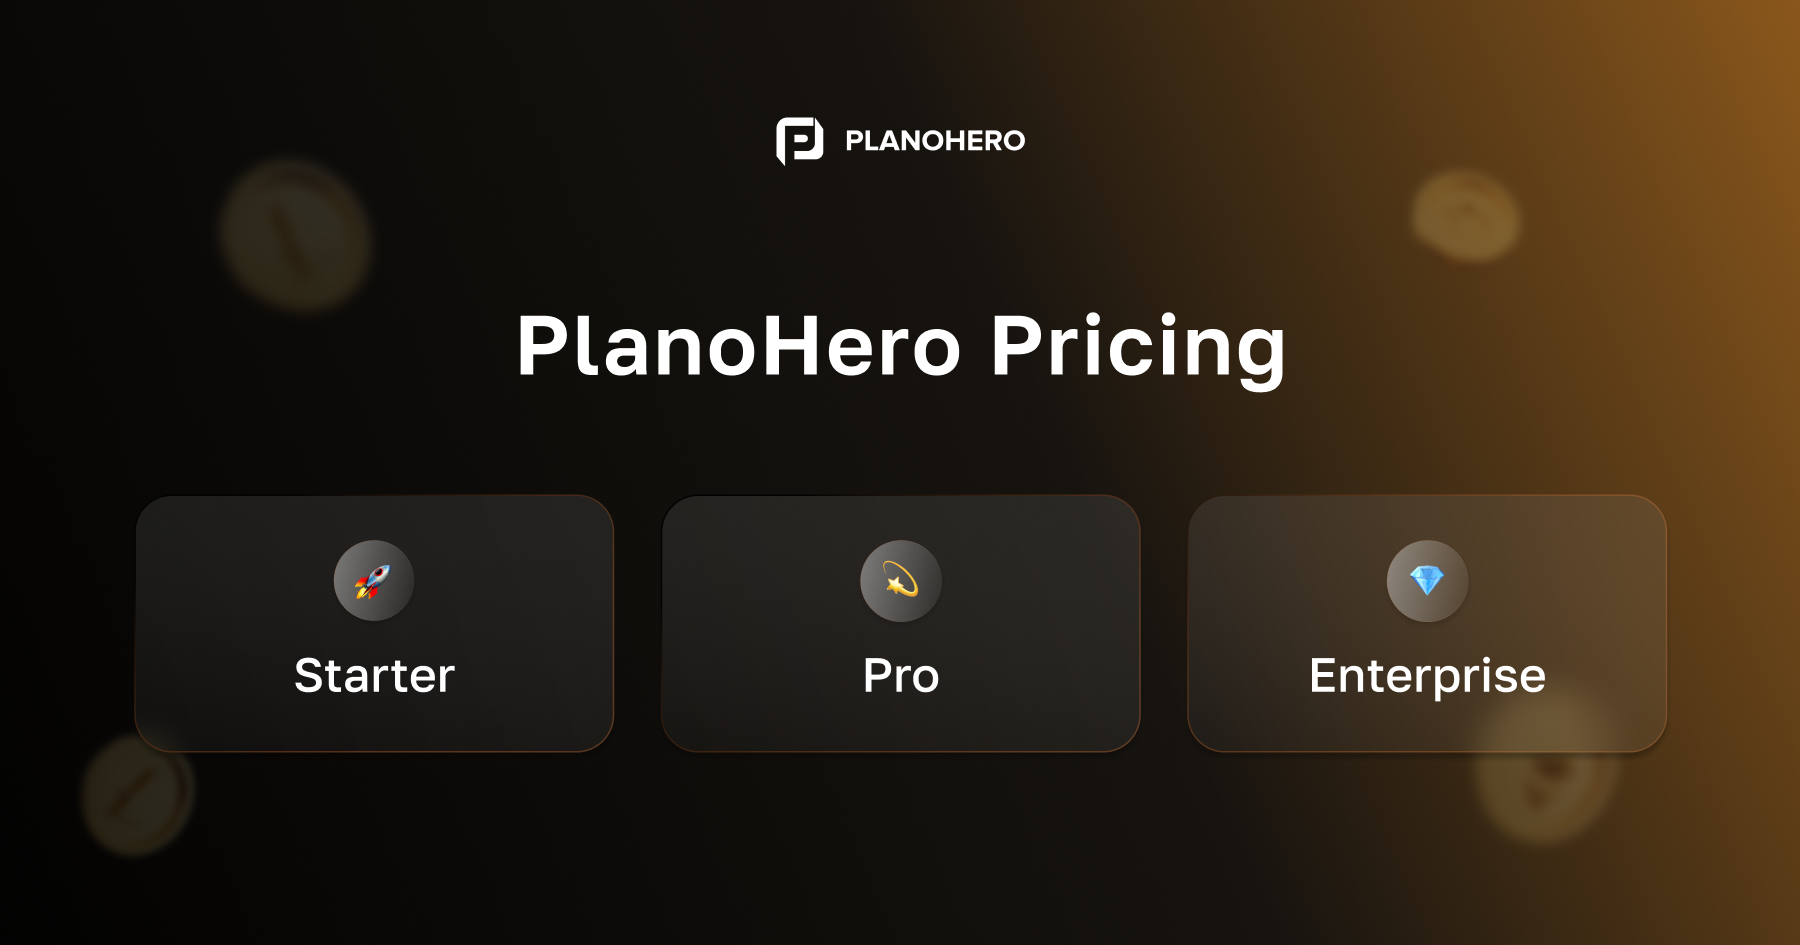 New. PlanoHero Pricing Plans. Functionality and Benefits Overview